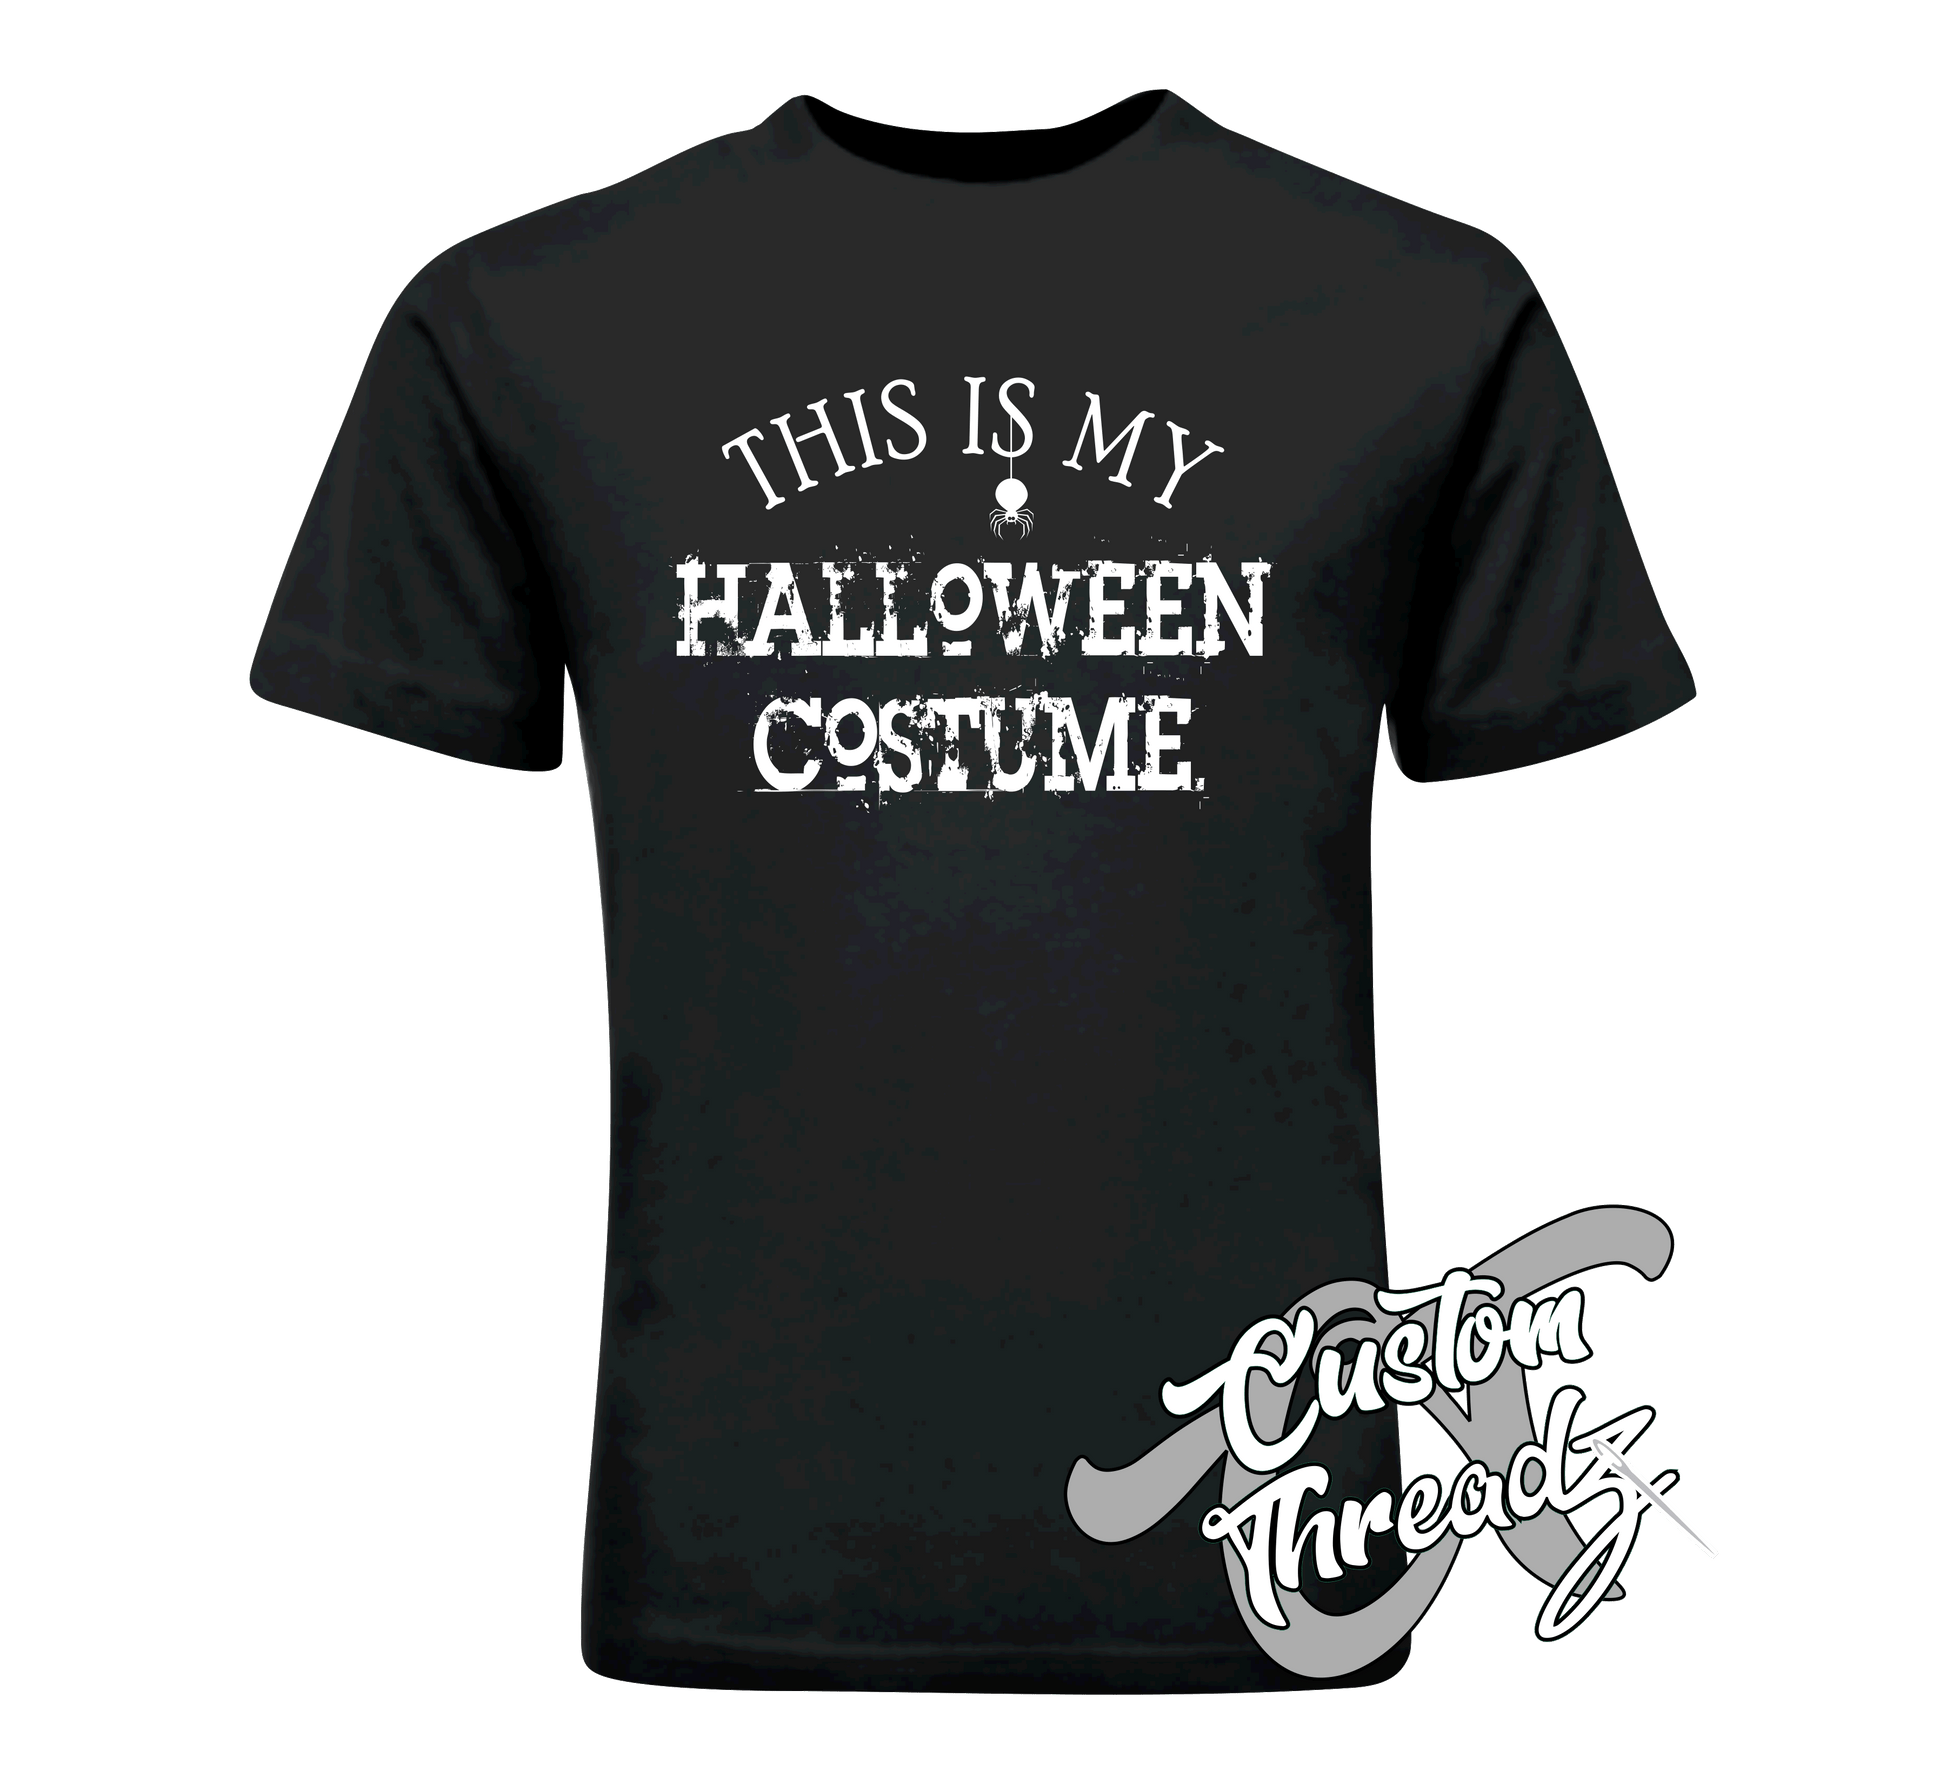 black tee with this is my halloween costume DTG printed design